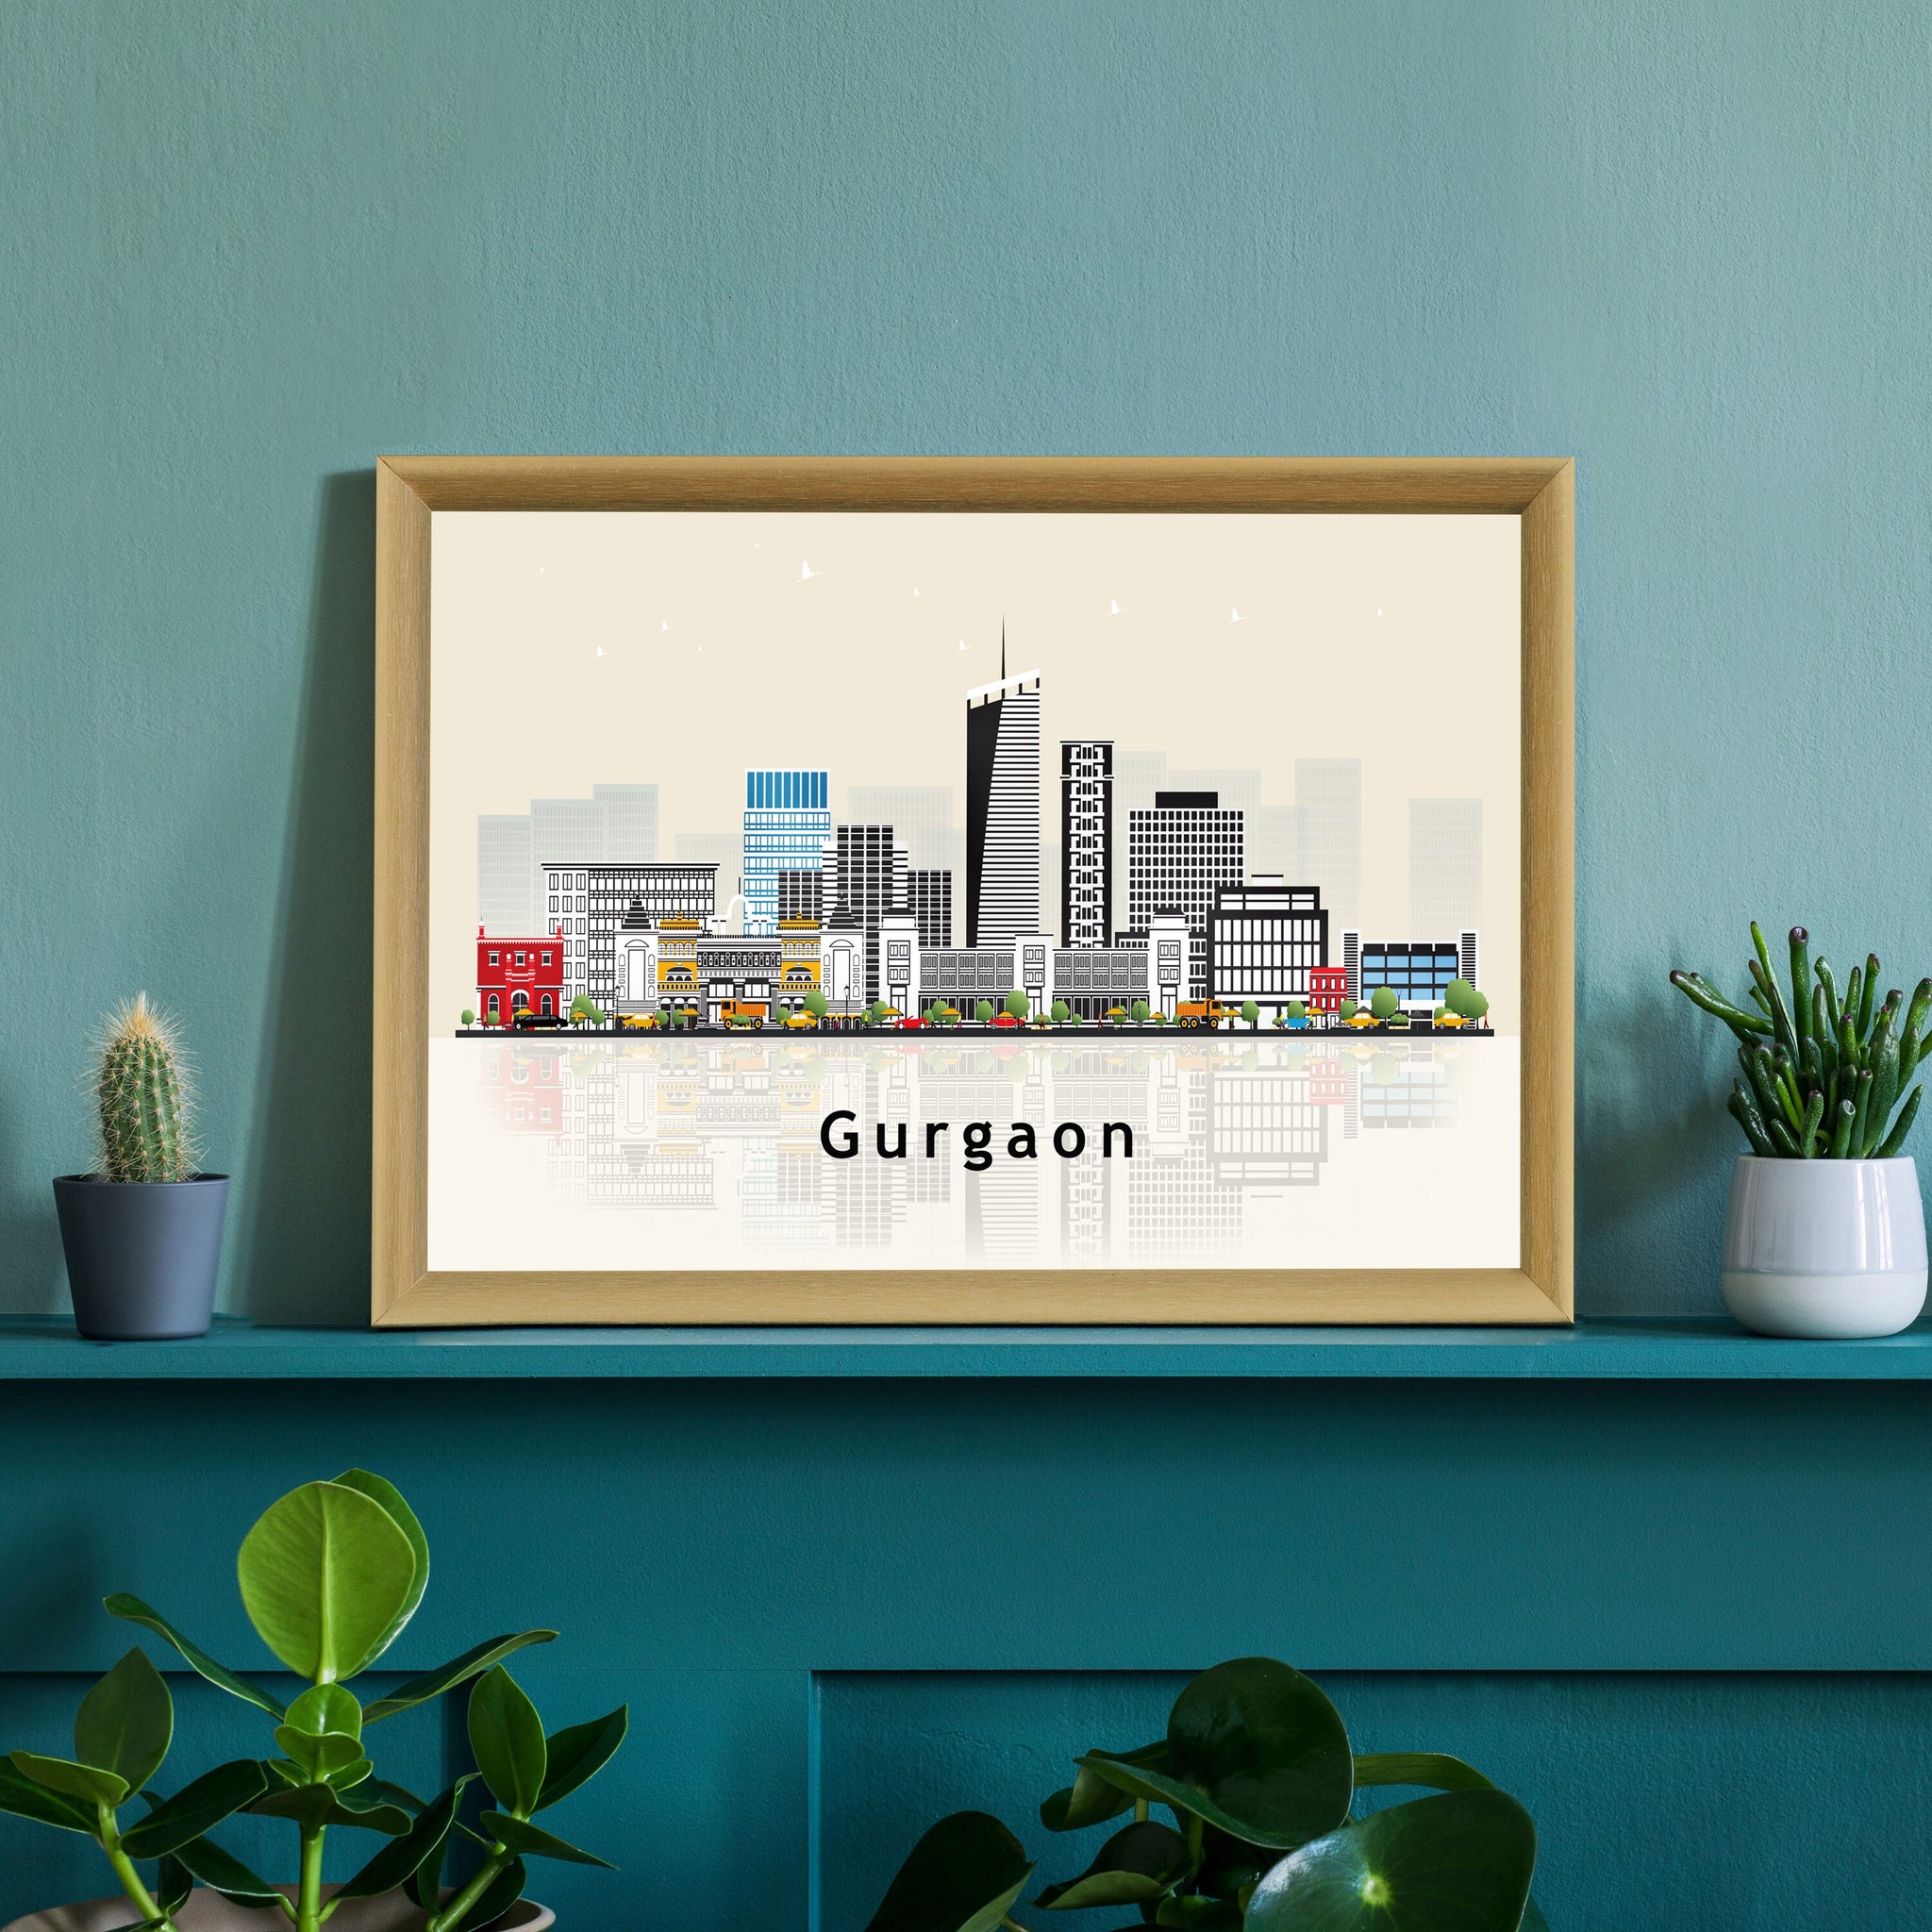 GURGAON INDIA Illustration skyline poster, Modern skyline cityscape poster, India city skyline landmark map poster, Home wall decoration